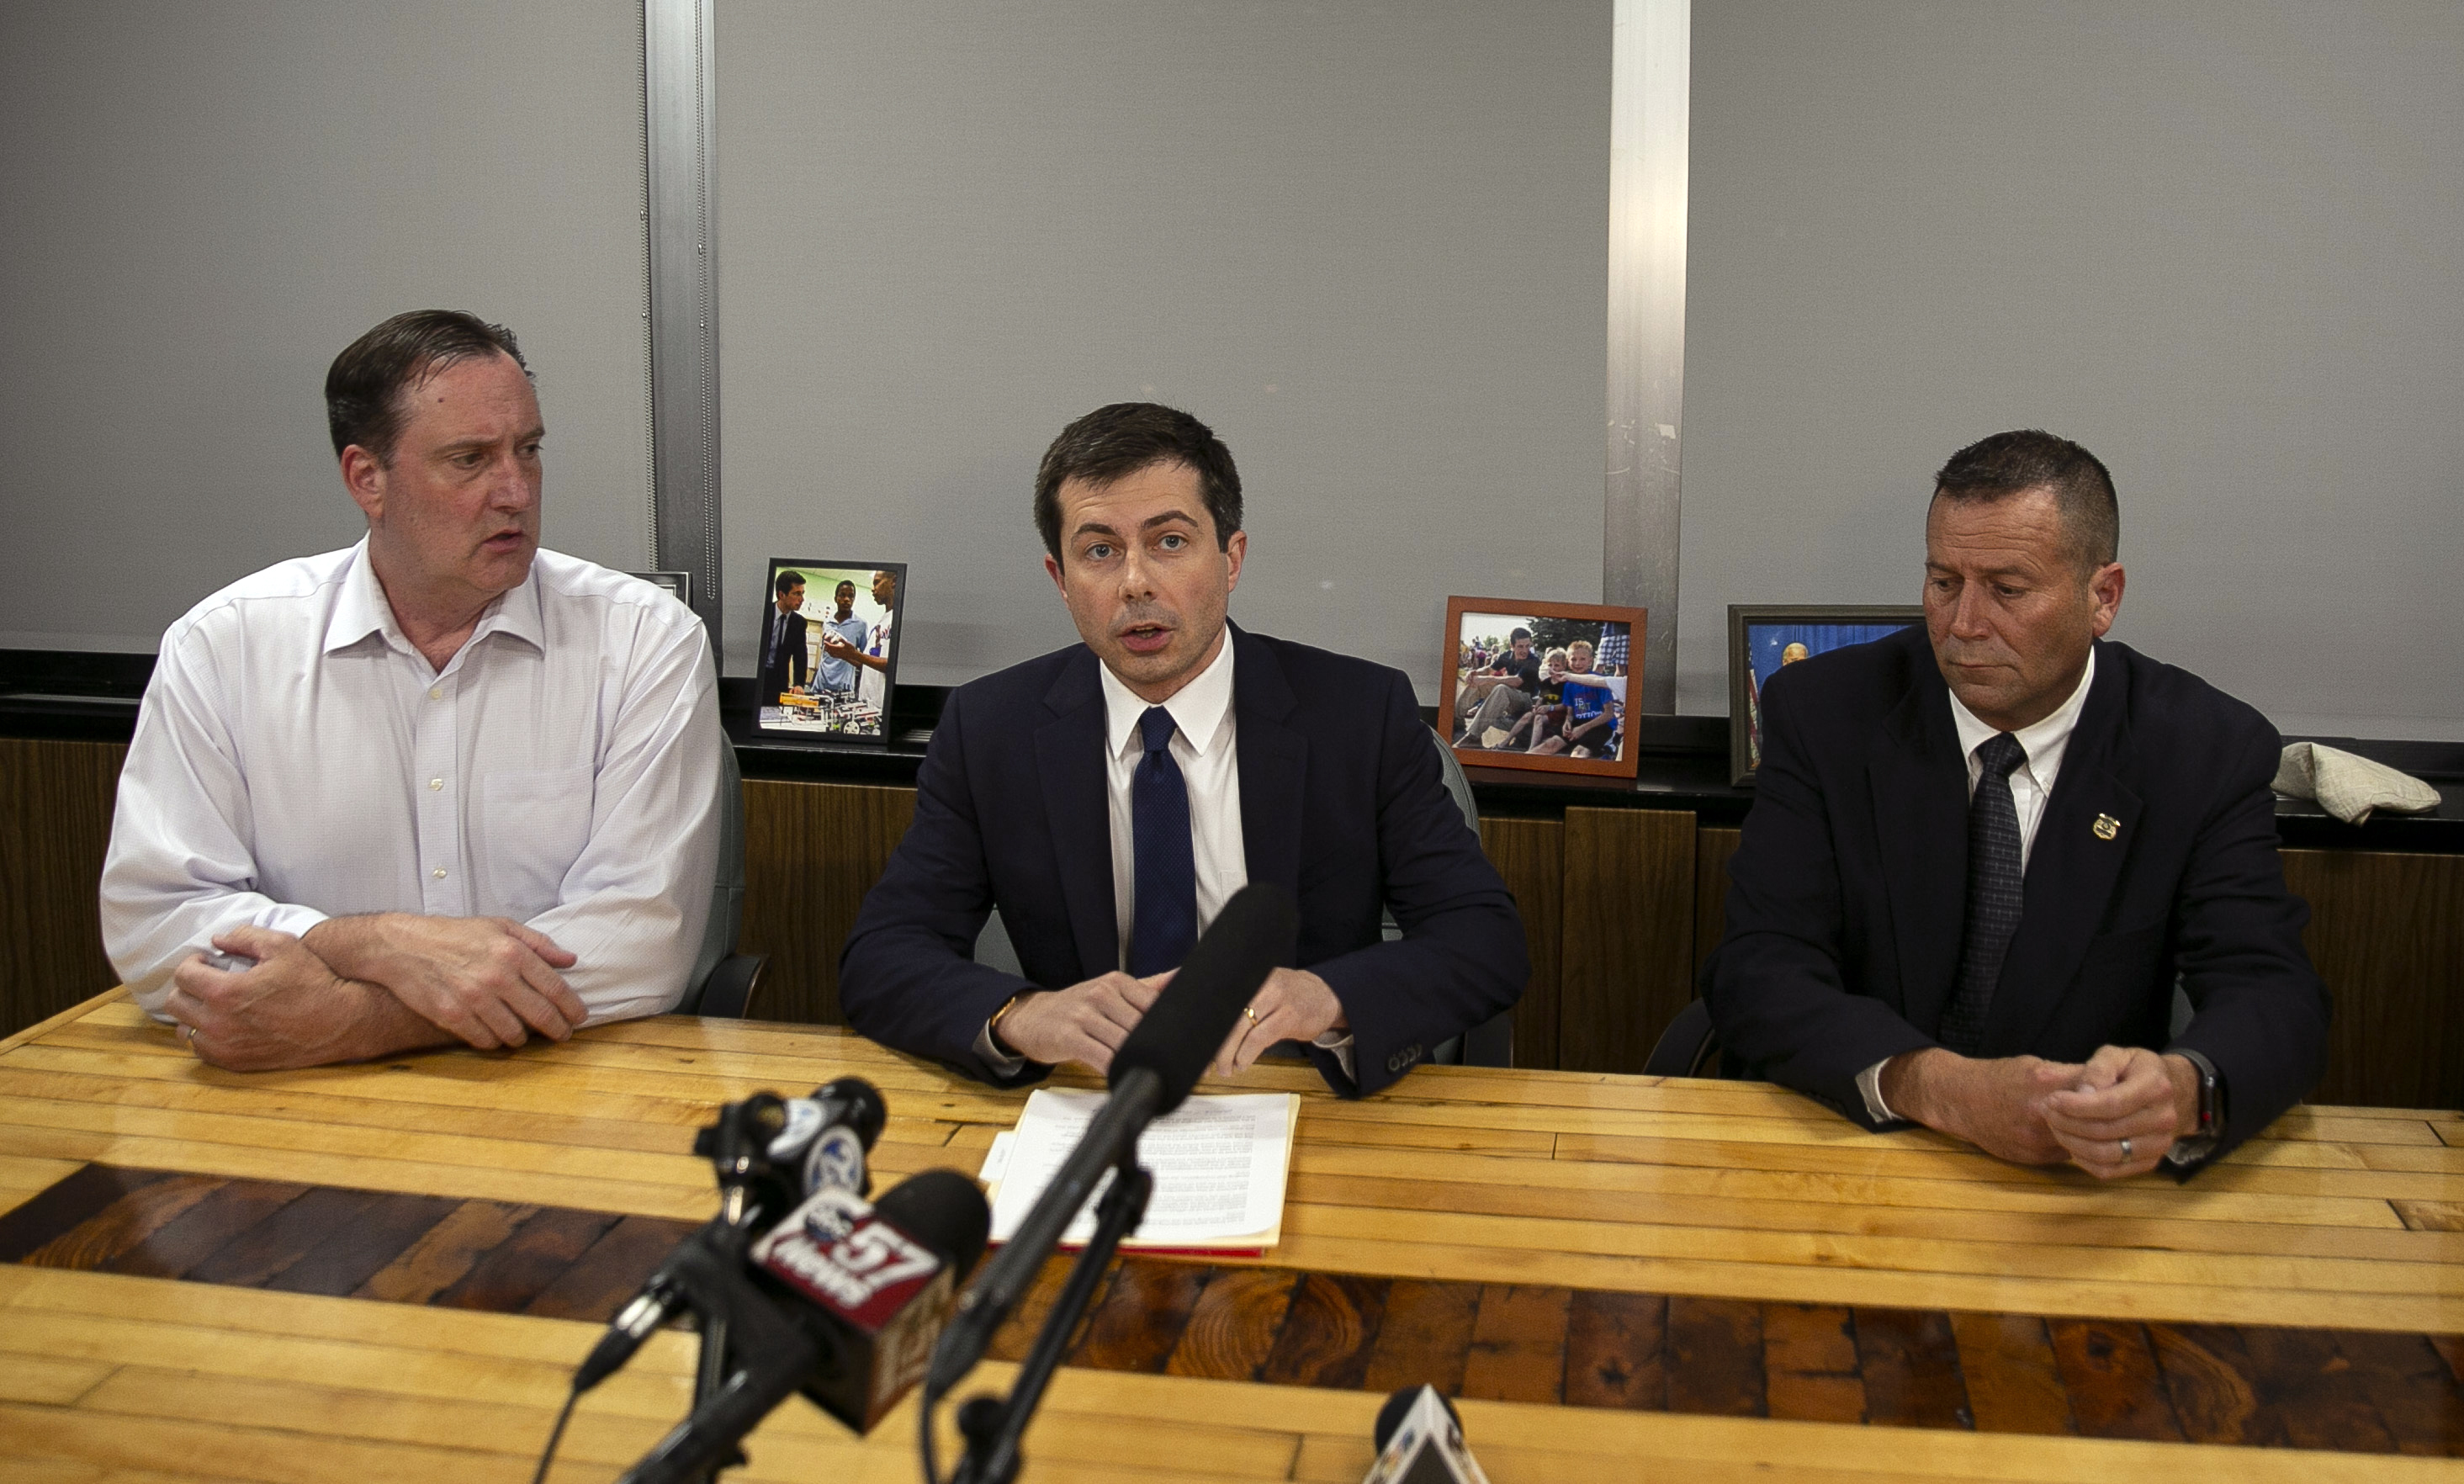 South Bend Mayor Pete Buttigieg, center, speaks during a news conference, Sunday, June 16, 2019, in South Bend, Ind., as South Bend Common Council President Tim Scott, left, and South Bend Police Chief Scott Ruszkowski, listen. Democratic presidential candidate Buttigieg changed his campaign schedule to return to South Bend for the late night news conference, after authorities say a man died after a shooting involving a police officer. (Santiago Flores—South Bend Tribune/AP)